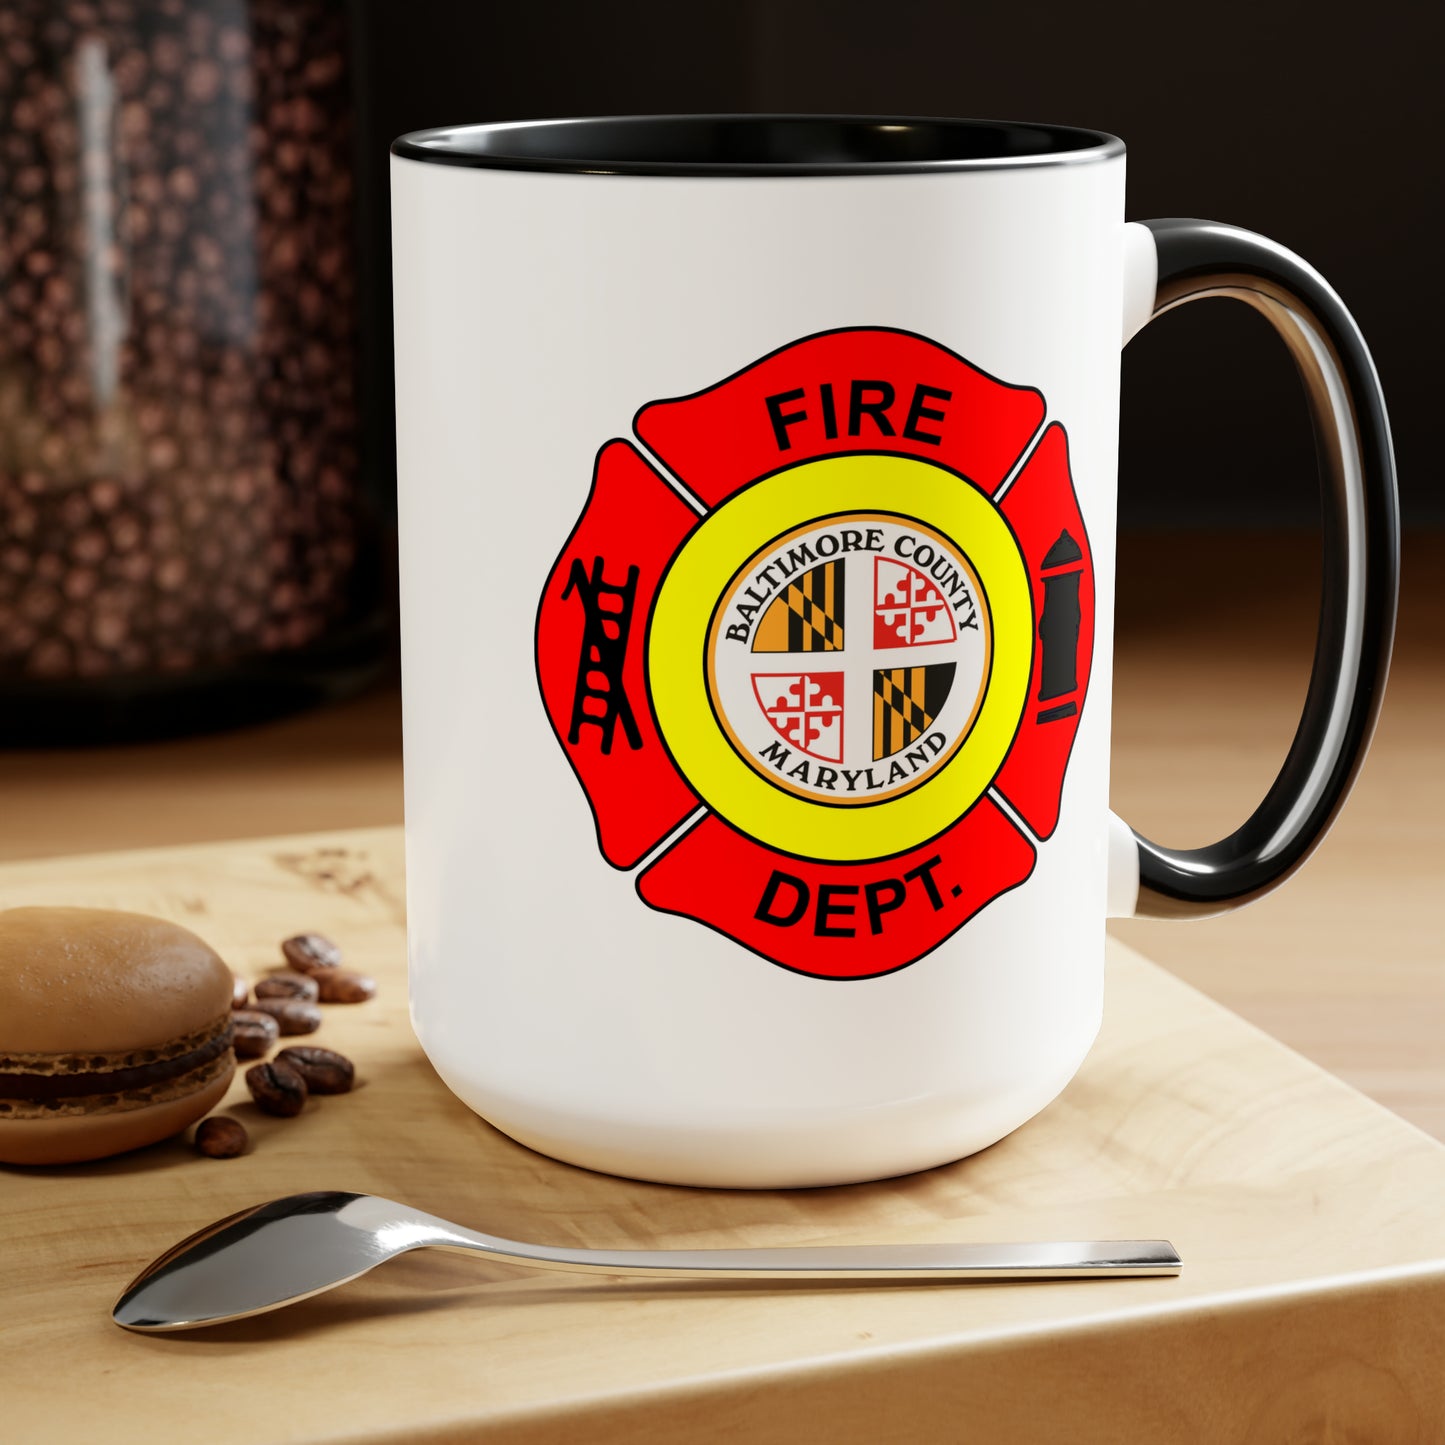 Baltimore Fire Department Coffee Mug - Double Sided Black Accent White Ceramic 15oz by TheGlassyLass